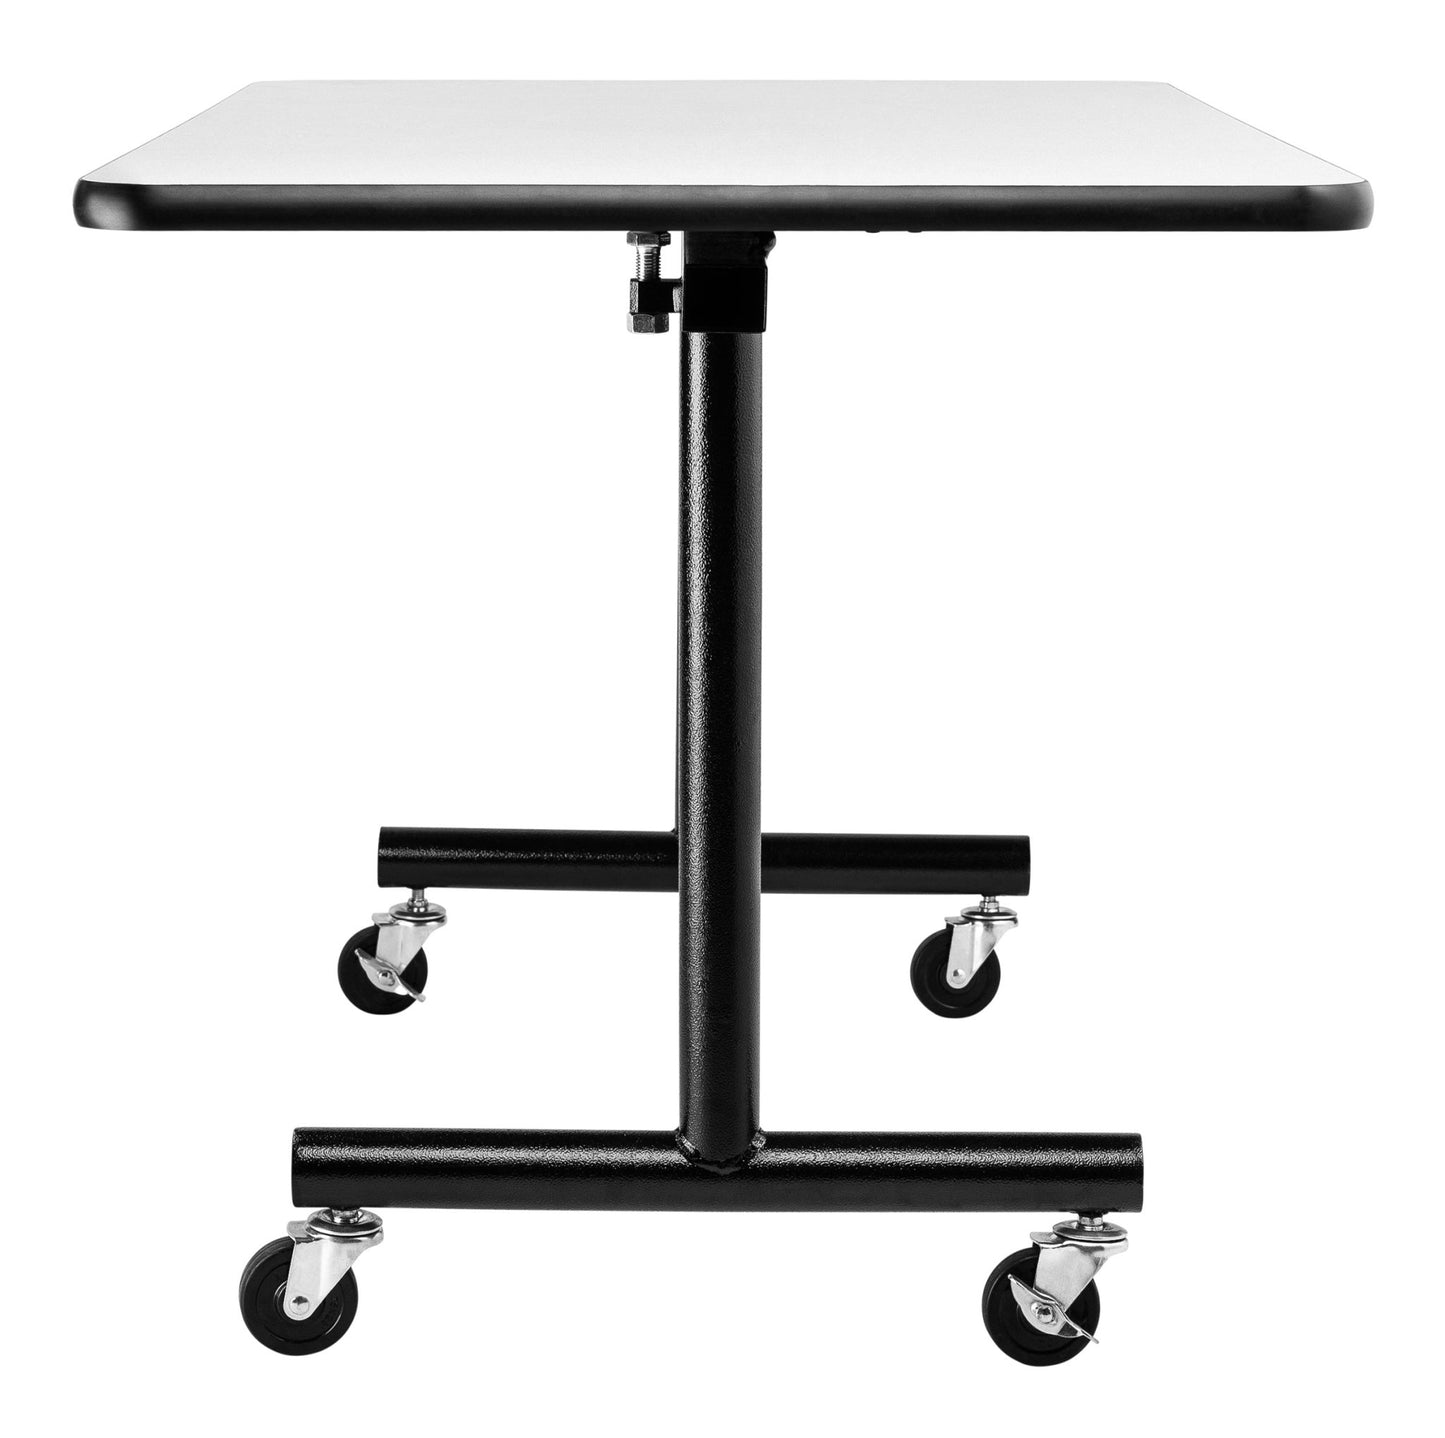 NPS ToGo Table, 24"x48", MDF Core (National Public Seating NPS-TGT2448MDPE) - SchoolOutlet